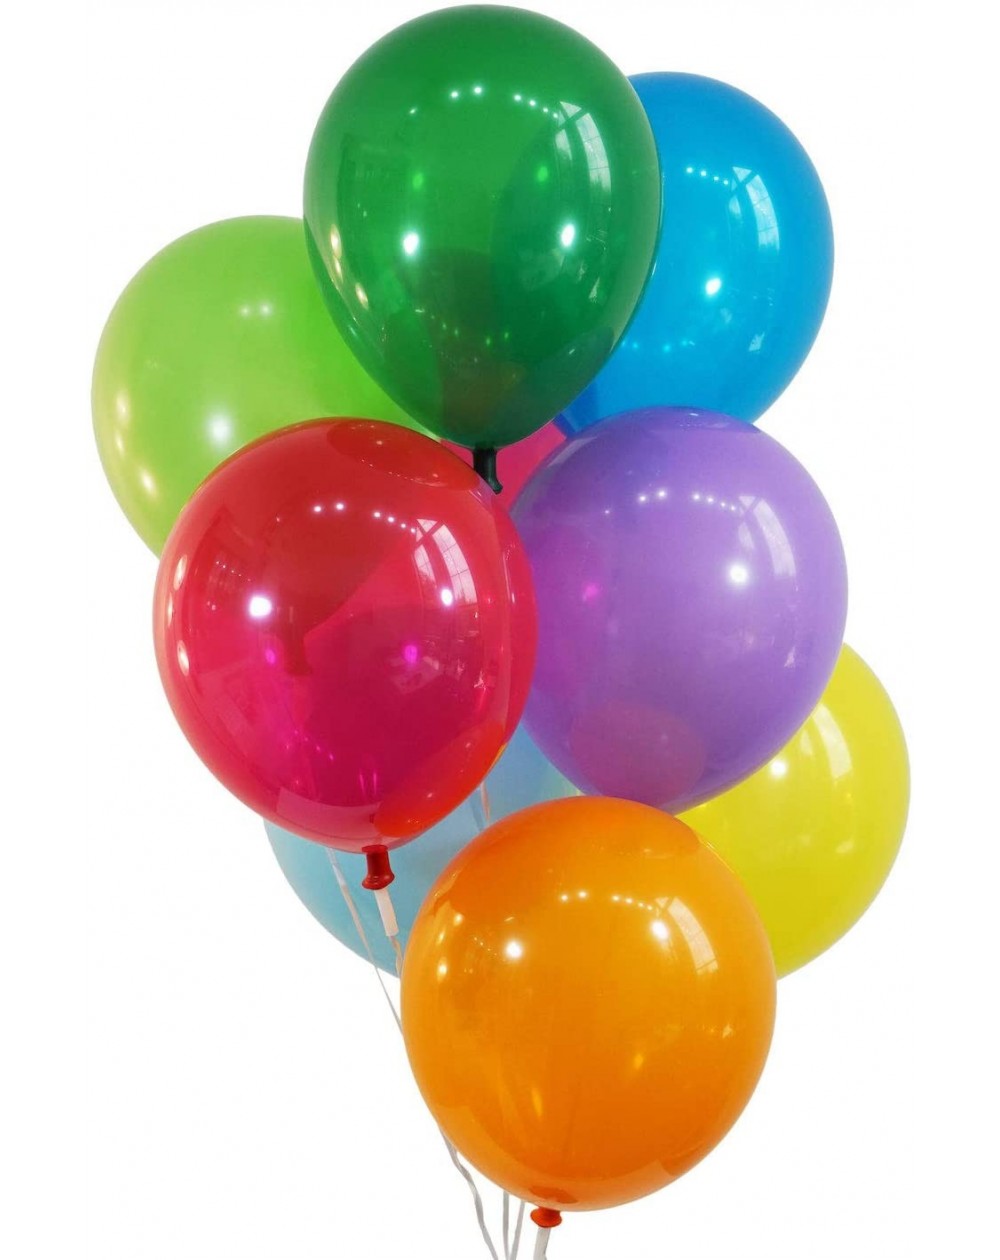 Balloons Creative Balloons Celebrity 9" Latex Balloons- Decorator Assorted Colors- Pack of 144 Pieces - CJ12GH2CW9X $11.99